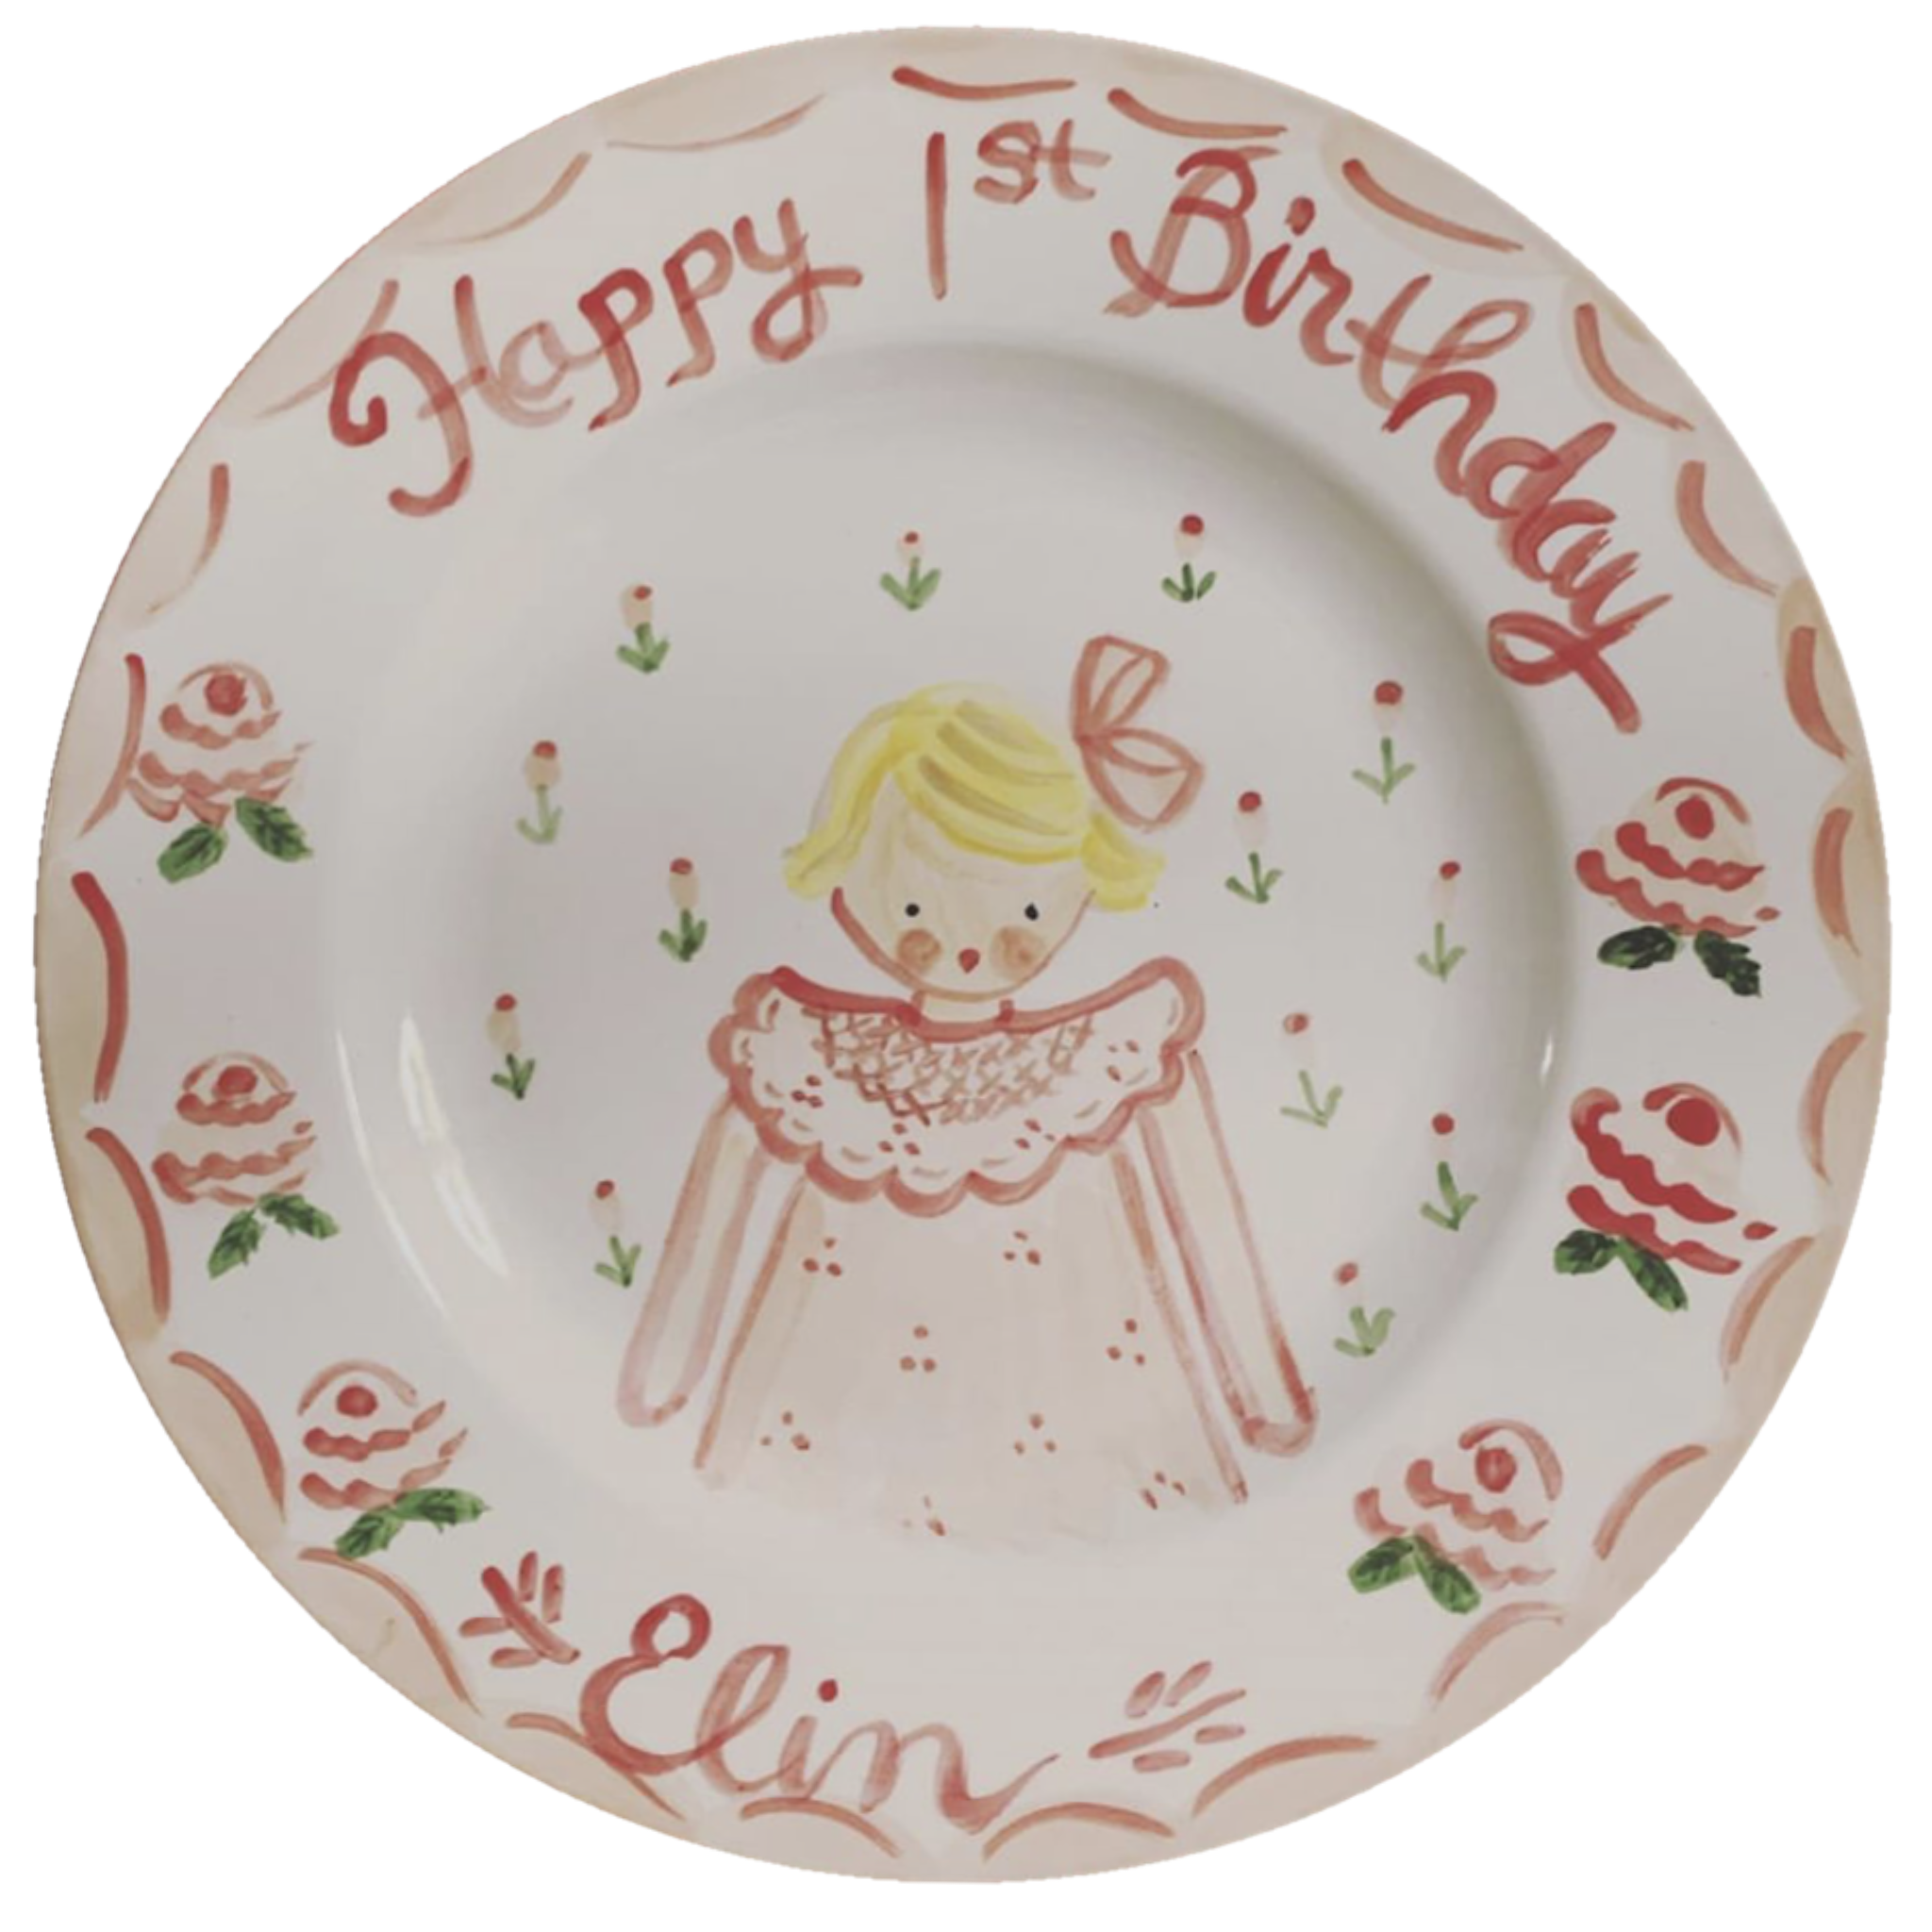 First Birthday Plate - Tricia Lowenfield Design